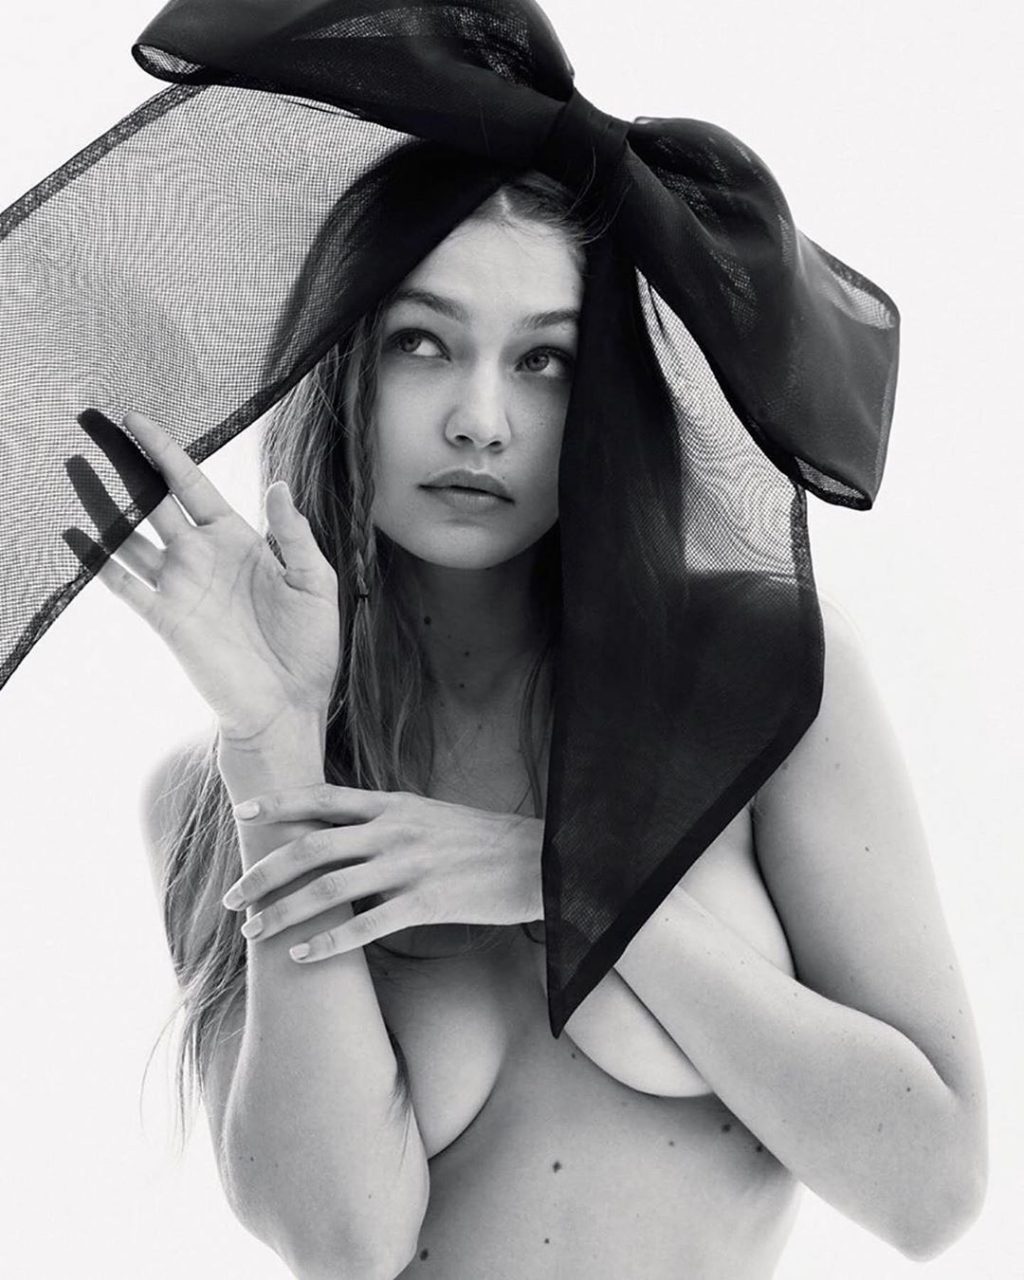 Gigi Hadid Photographed Nude for Russian Vogue (17 Photos)